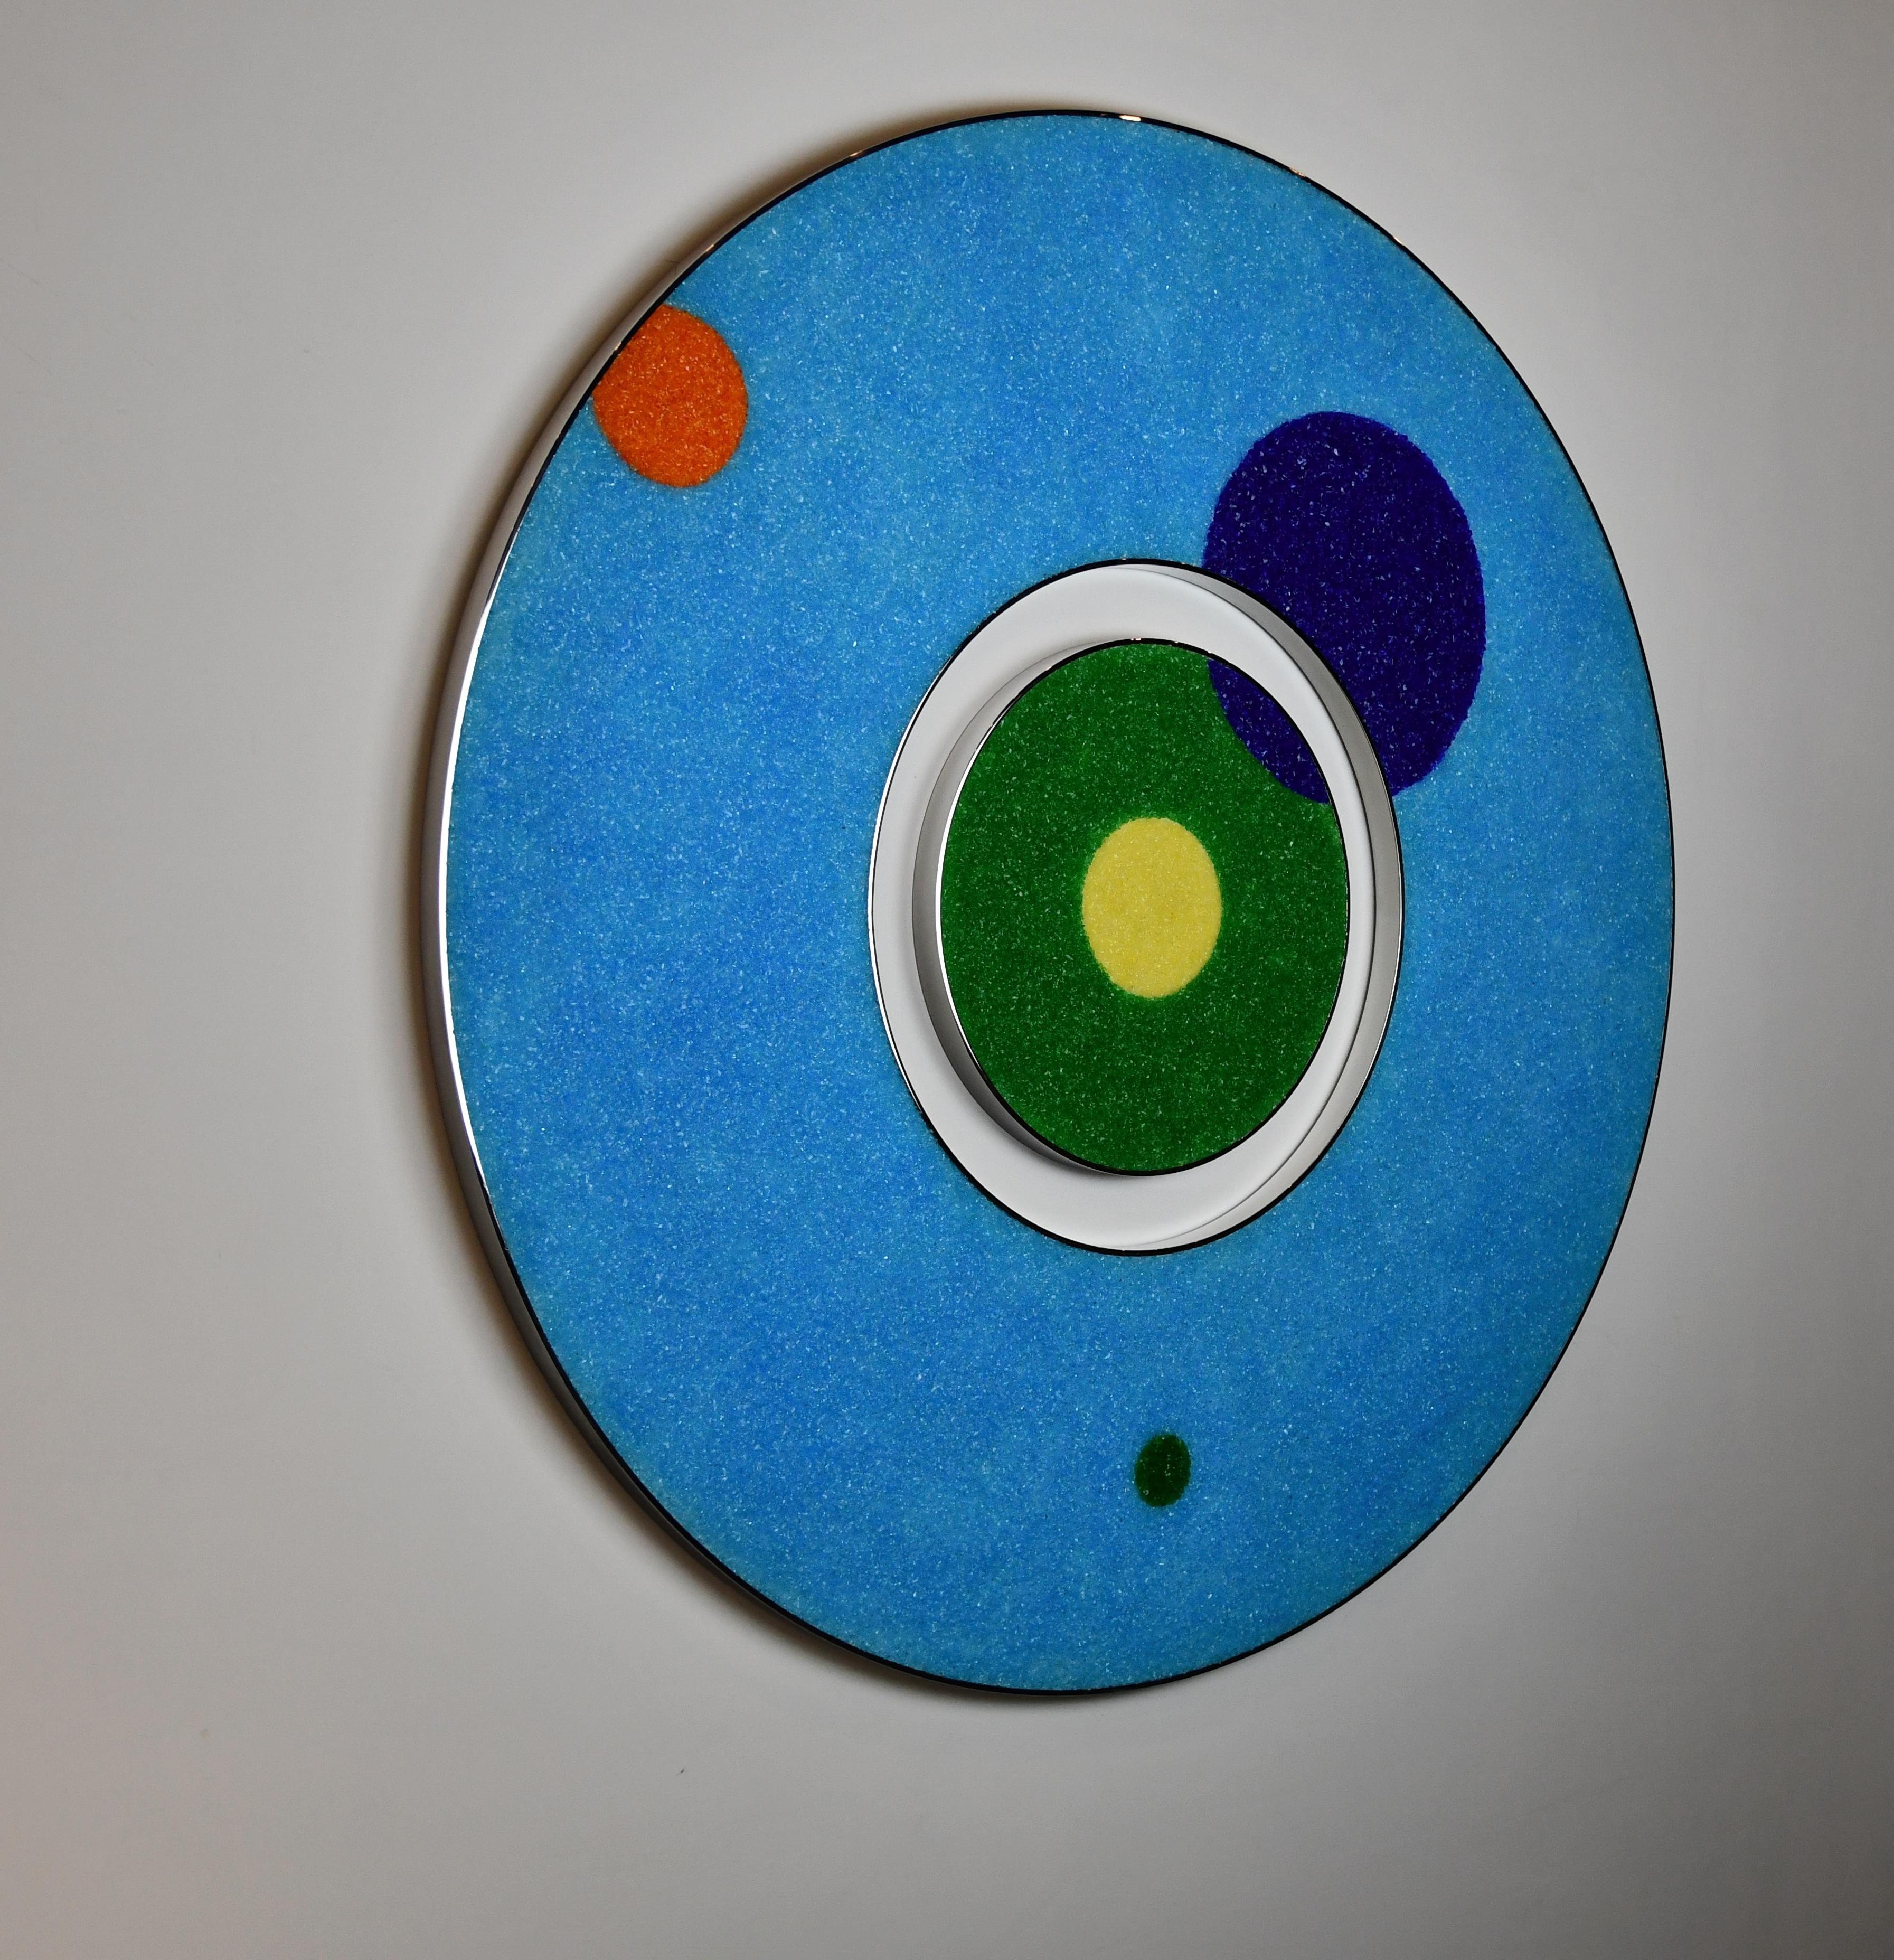 “A Delicate Balance” is a one-of-a-kind two-piece wall sculpture. The outer circle is made with fragmented Murano glass and acrylic over a base of reclaimed wood framed by two thin bands of stainless-steel polished to a mirror finish. The inner